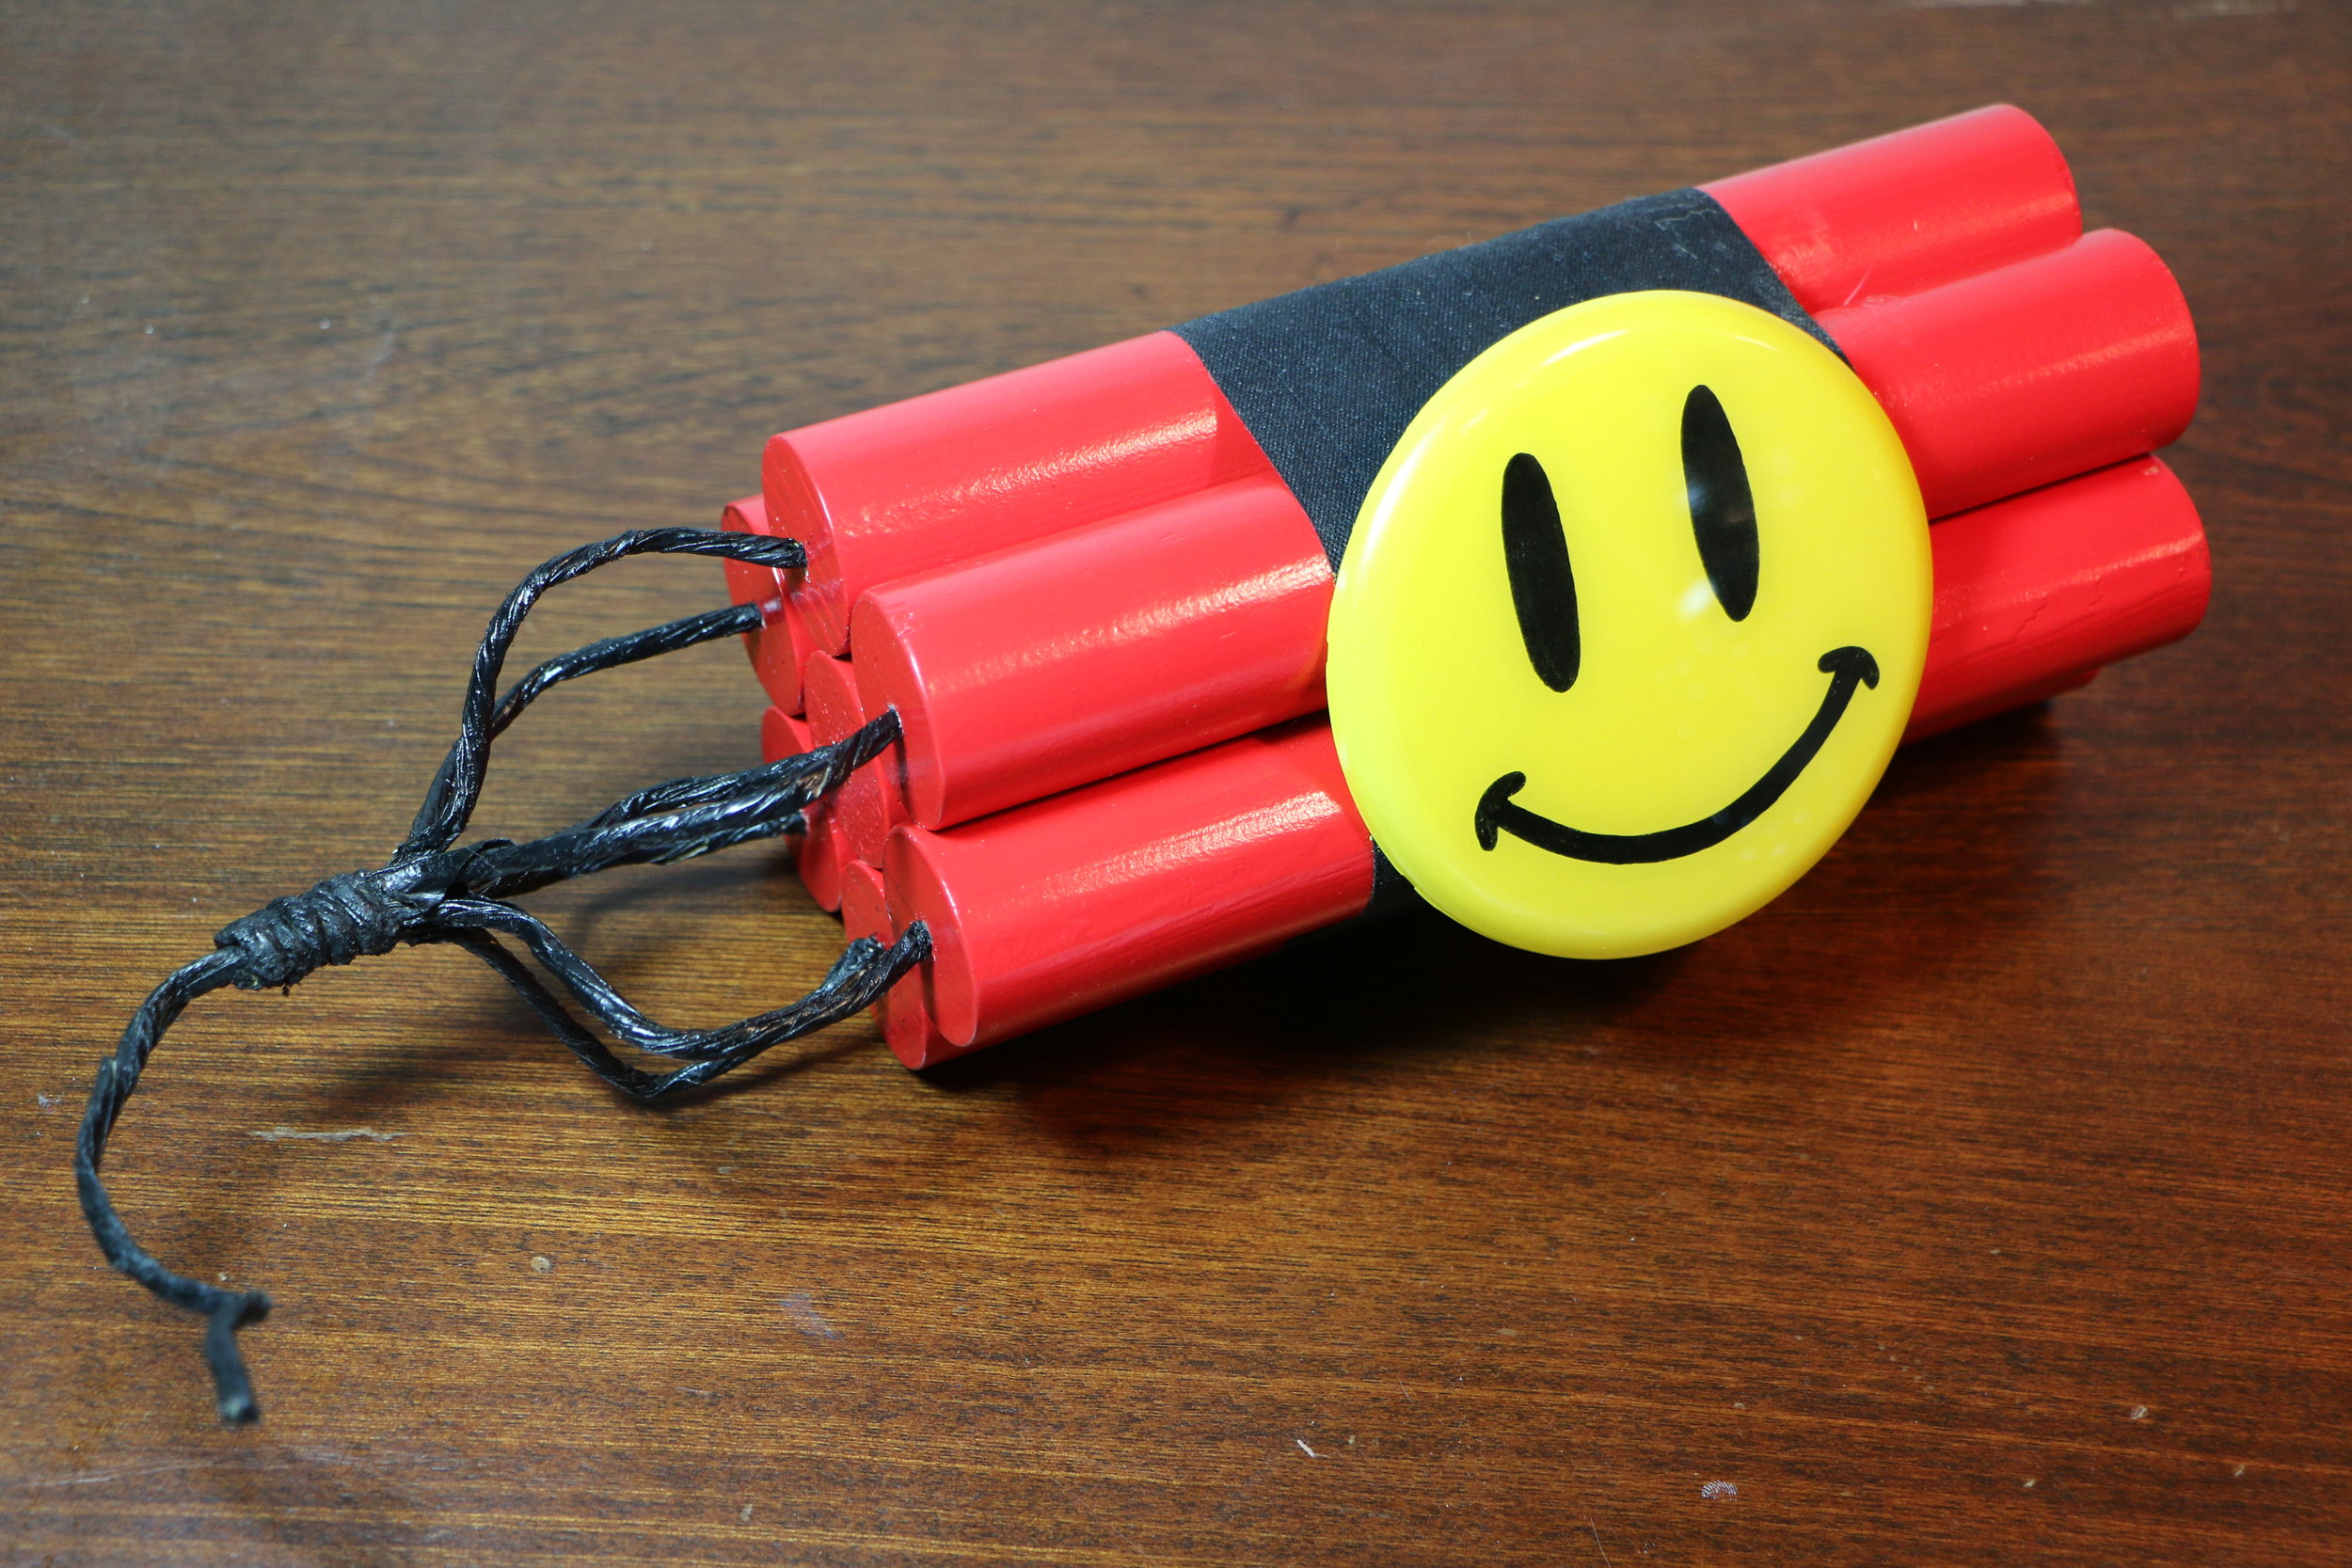  Team Nice Dynamite prop - Wooden dowels, hockey tape, large button painted as smiley face. (2017) 